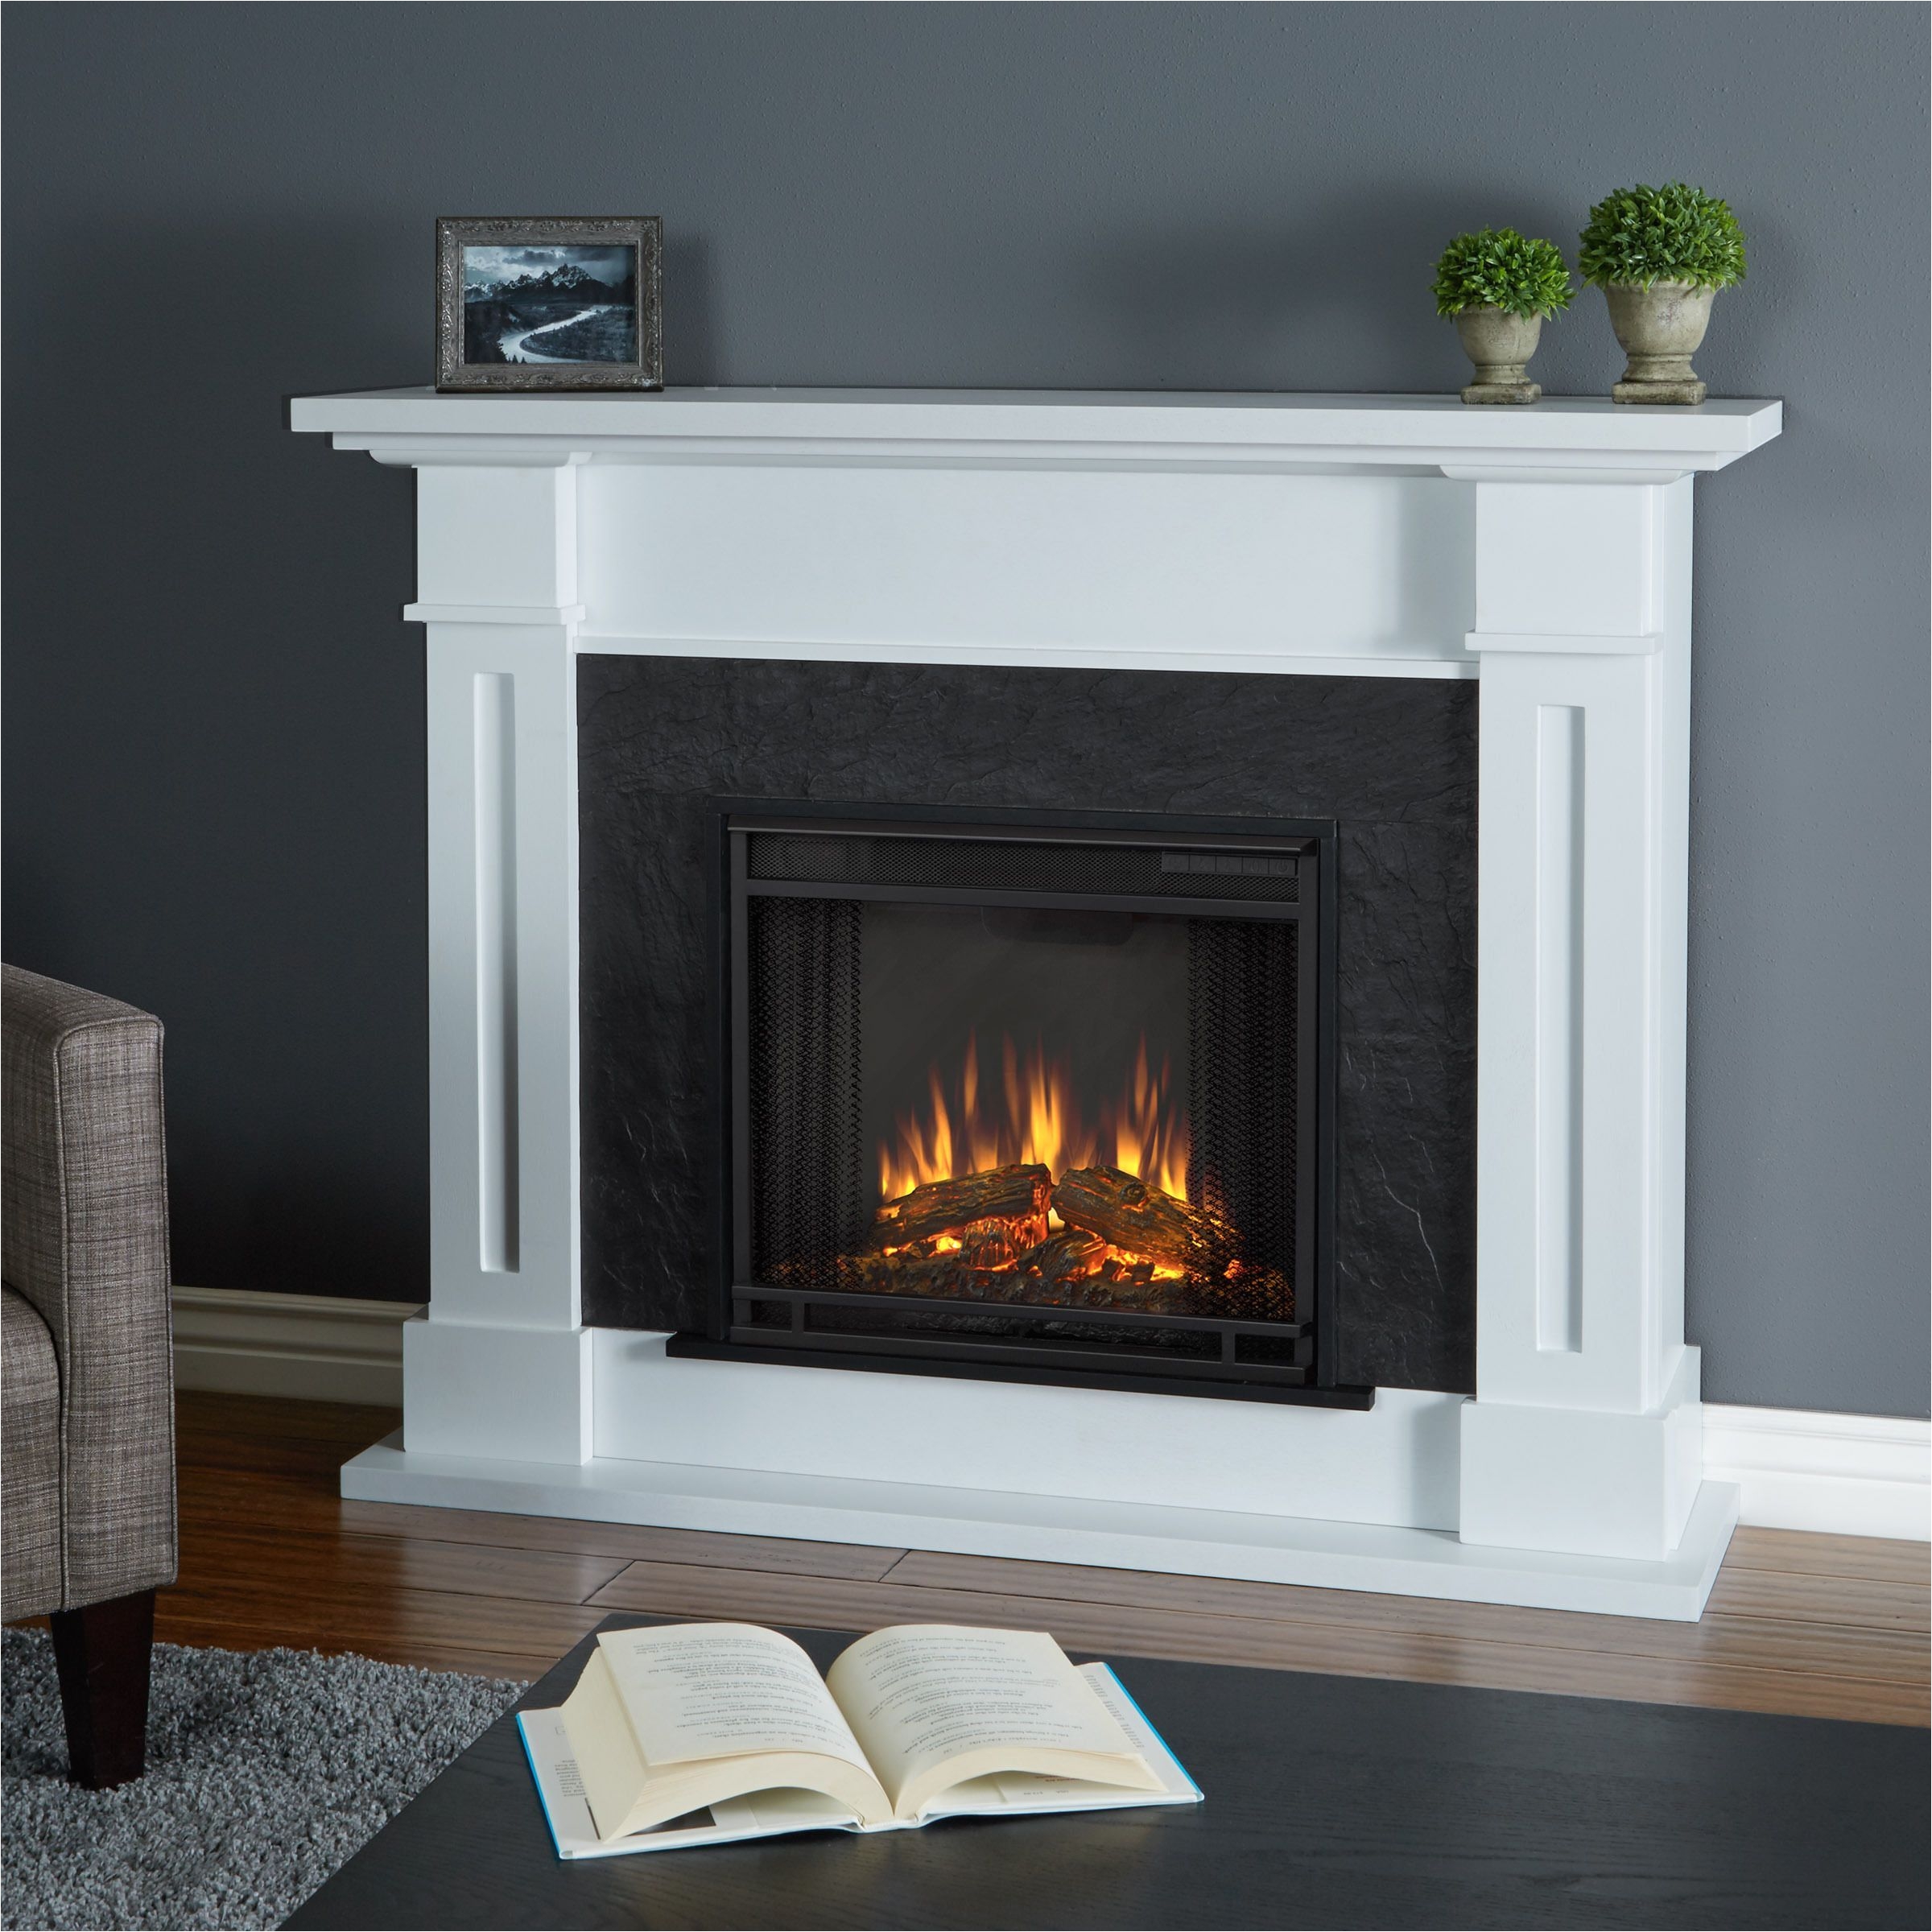 fake fire light for fireplace exquisitely light and warm your home with this real flame fireplace of fake fire light for fireplace